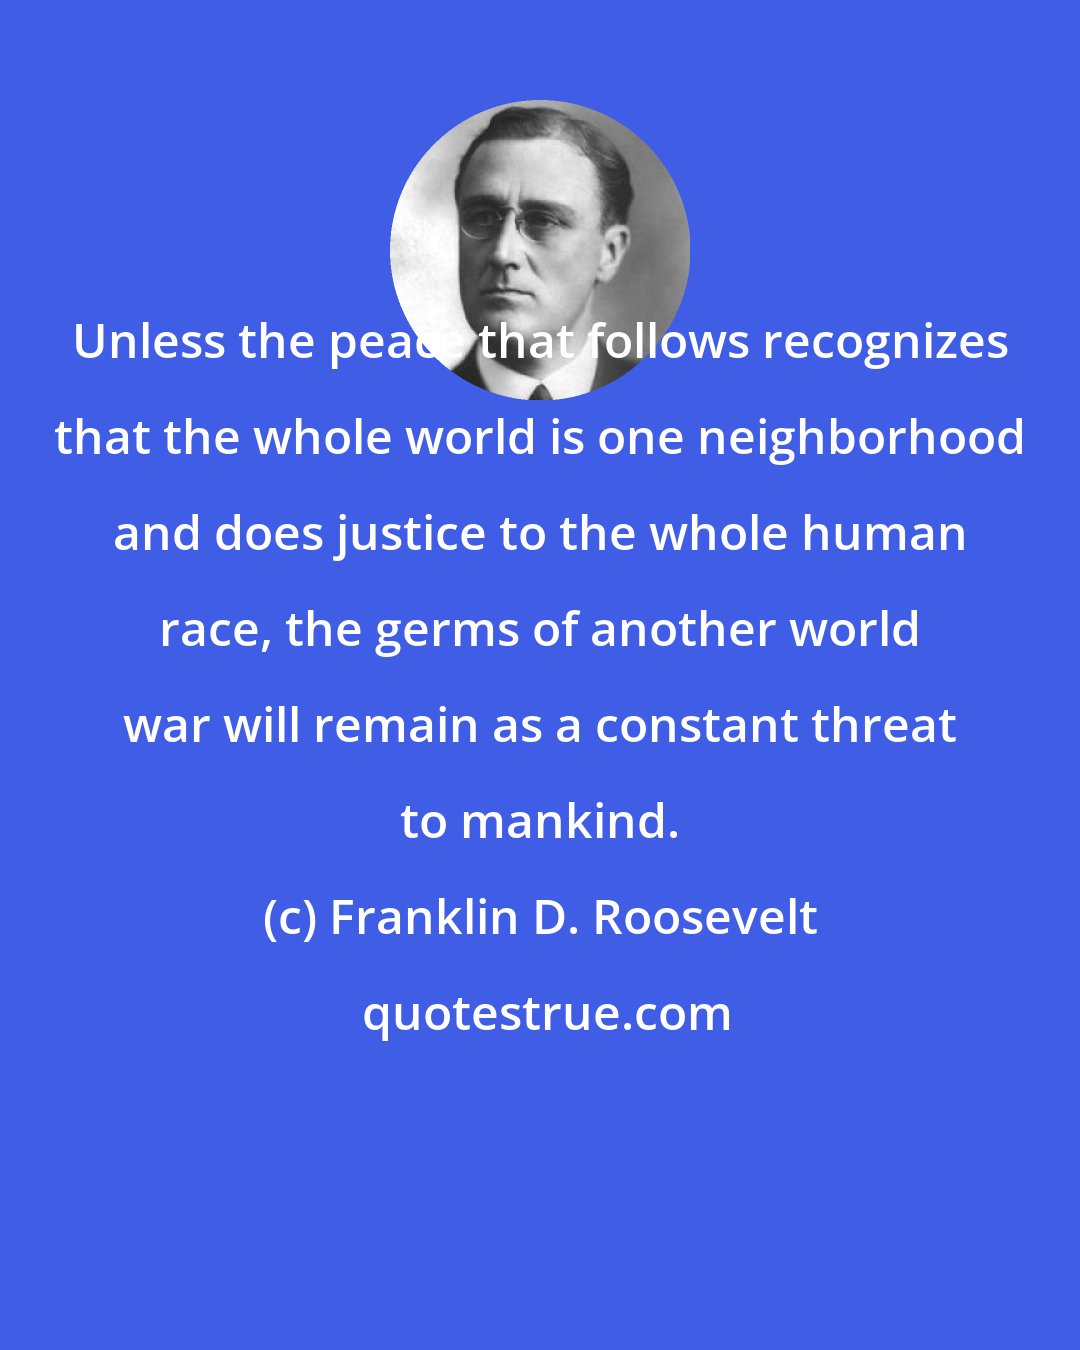 Franklin D. Roosevelt: Unless the peace that follows recognizes that the whole world is one neighborhood and does justice to the whole human race, the germs of another world war will remain as a constant threat to mankind.